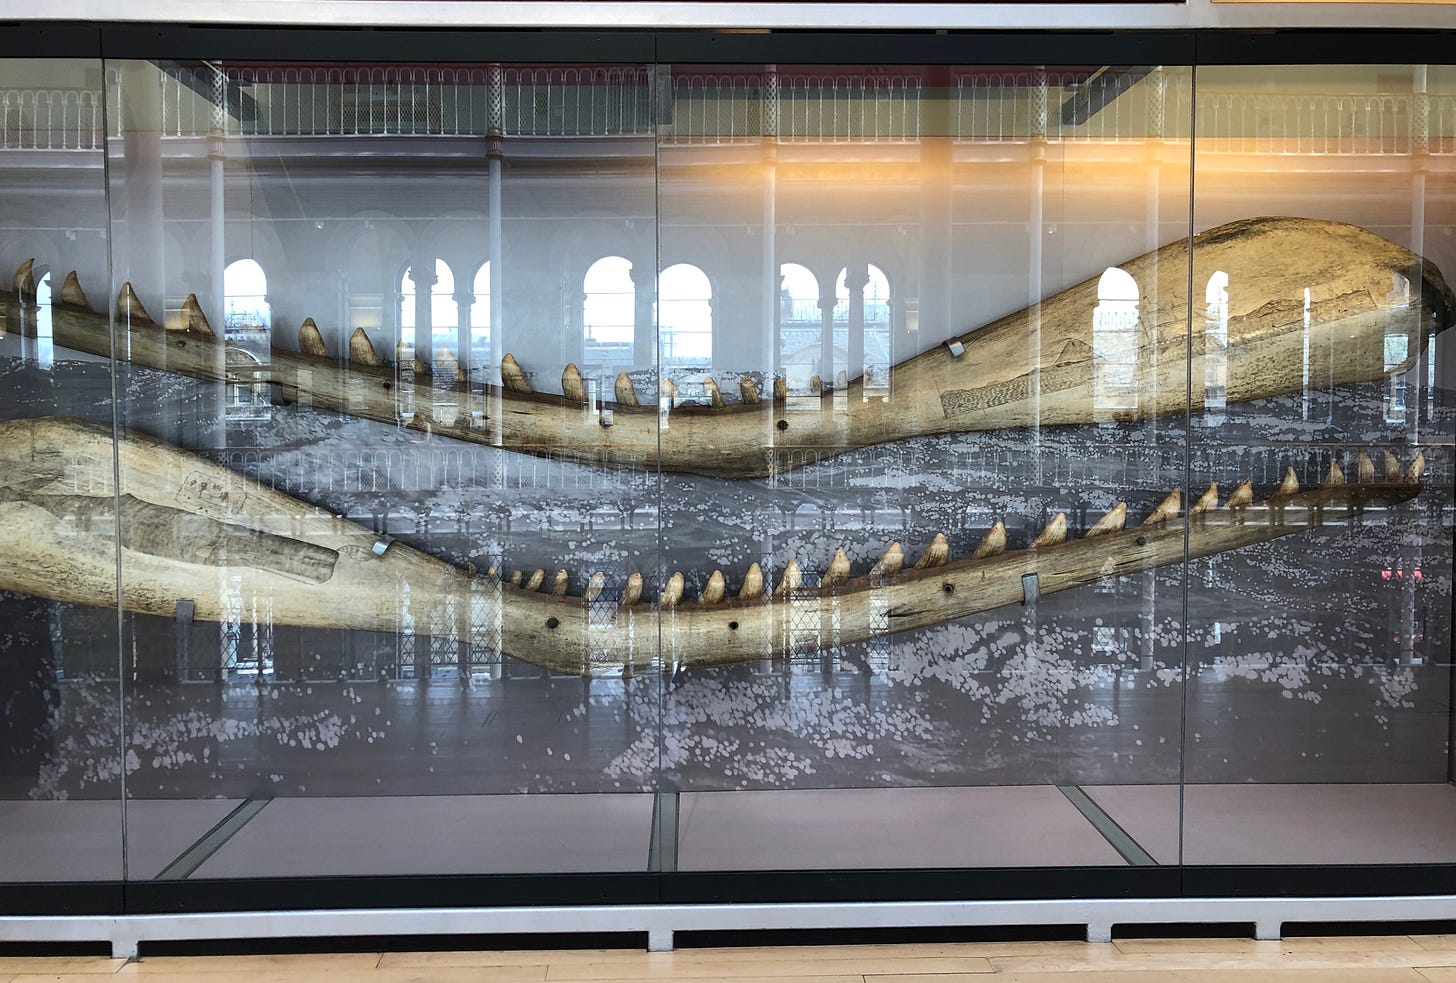 Two sperm whale jaw bones sit in a glass-fronted museum case on which arches and windows from the opposite side of the building are reflected. The jawbones have been decorated with scrimshaw art showing a sperm whale and a whale hunt.